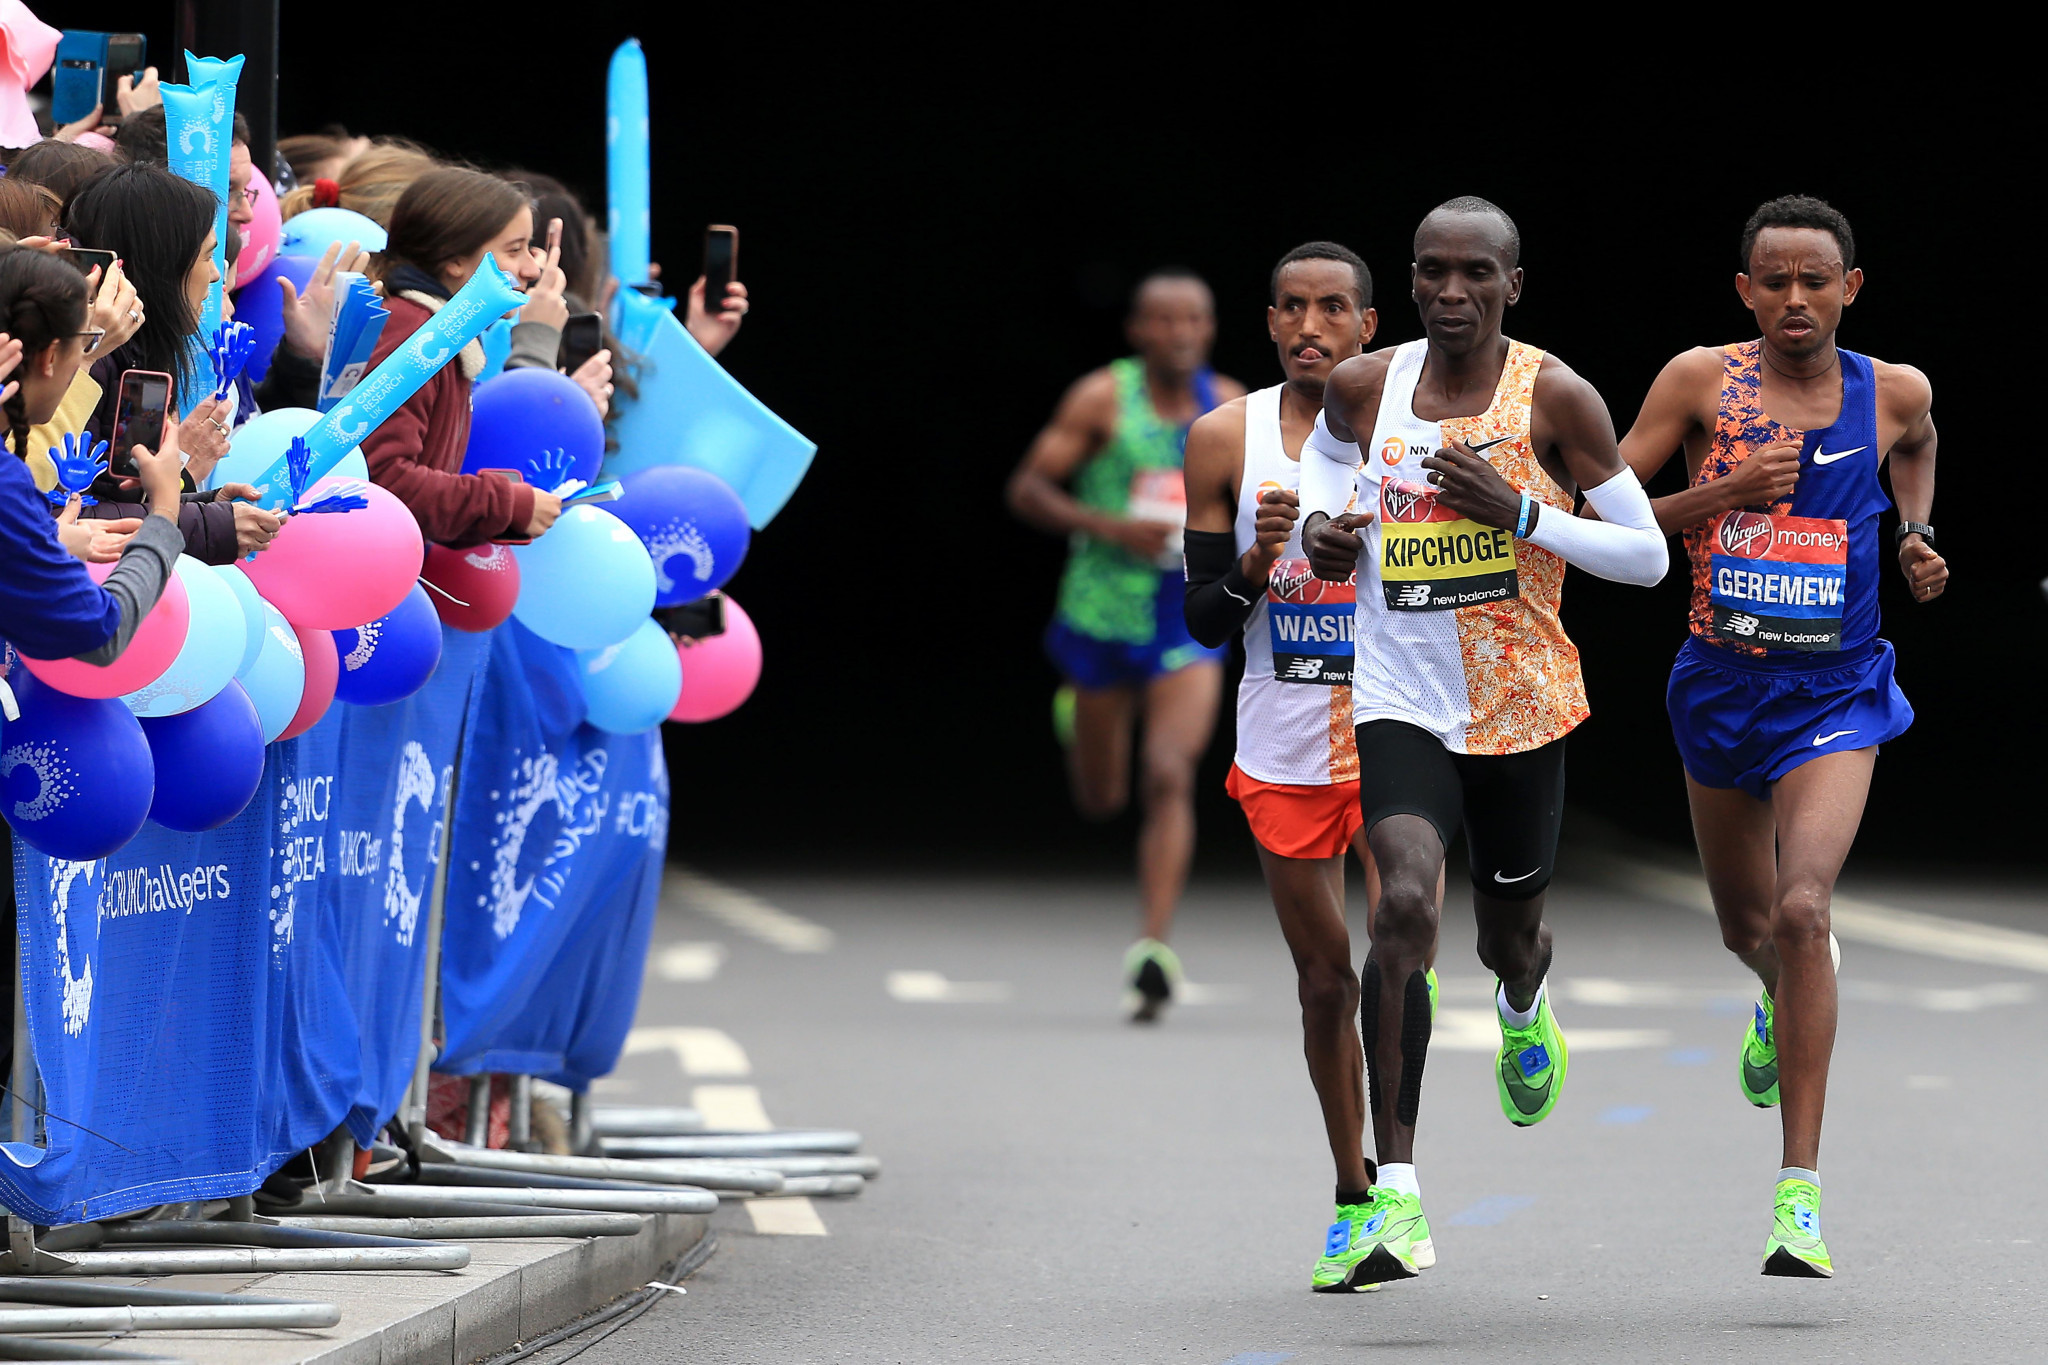 Eliud Kipchoge shook off his rivals in the closing stages to win the men's event for a record fourth time ©Getty Images